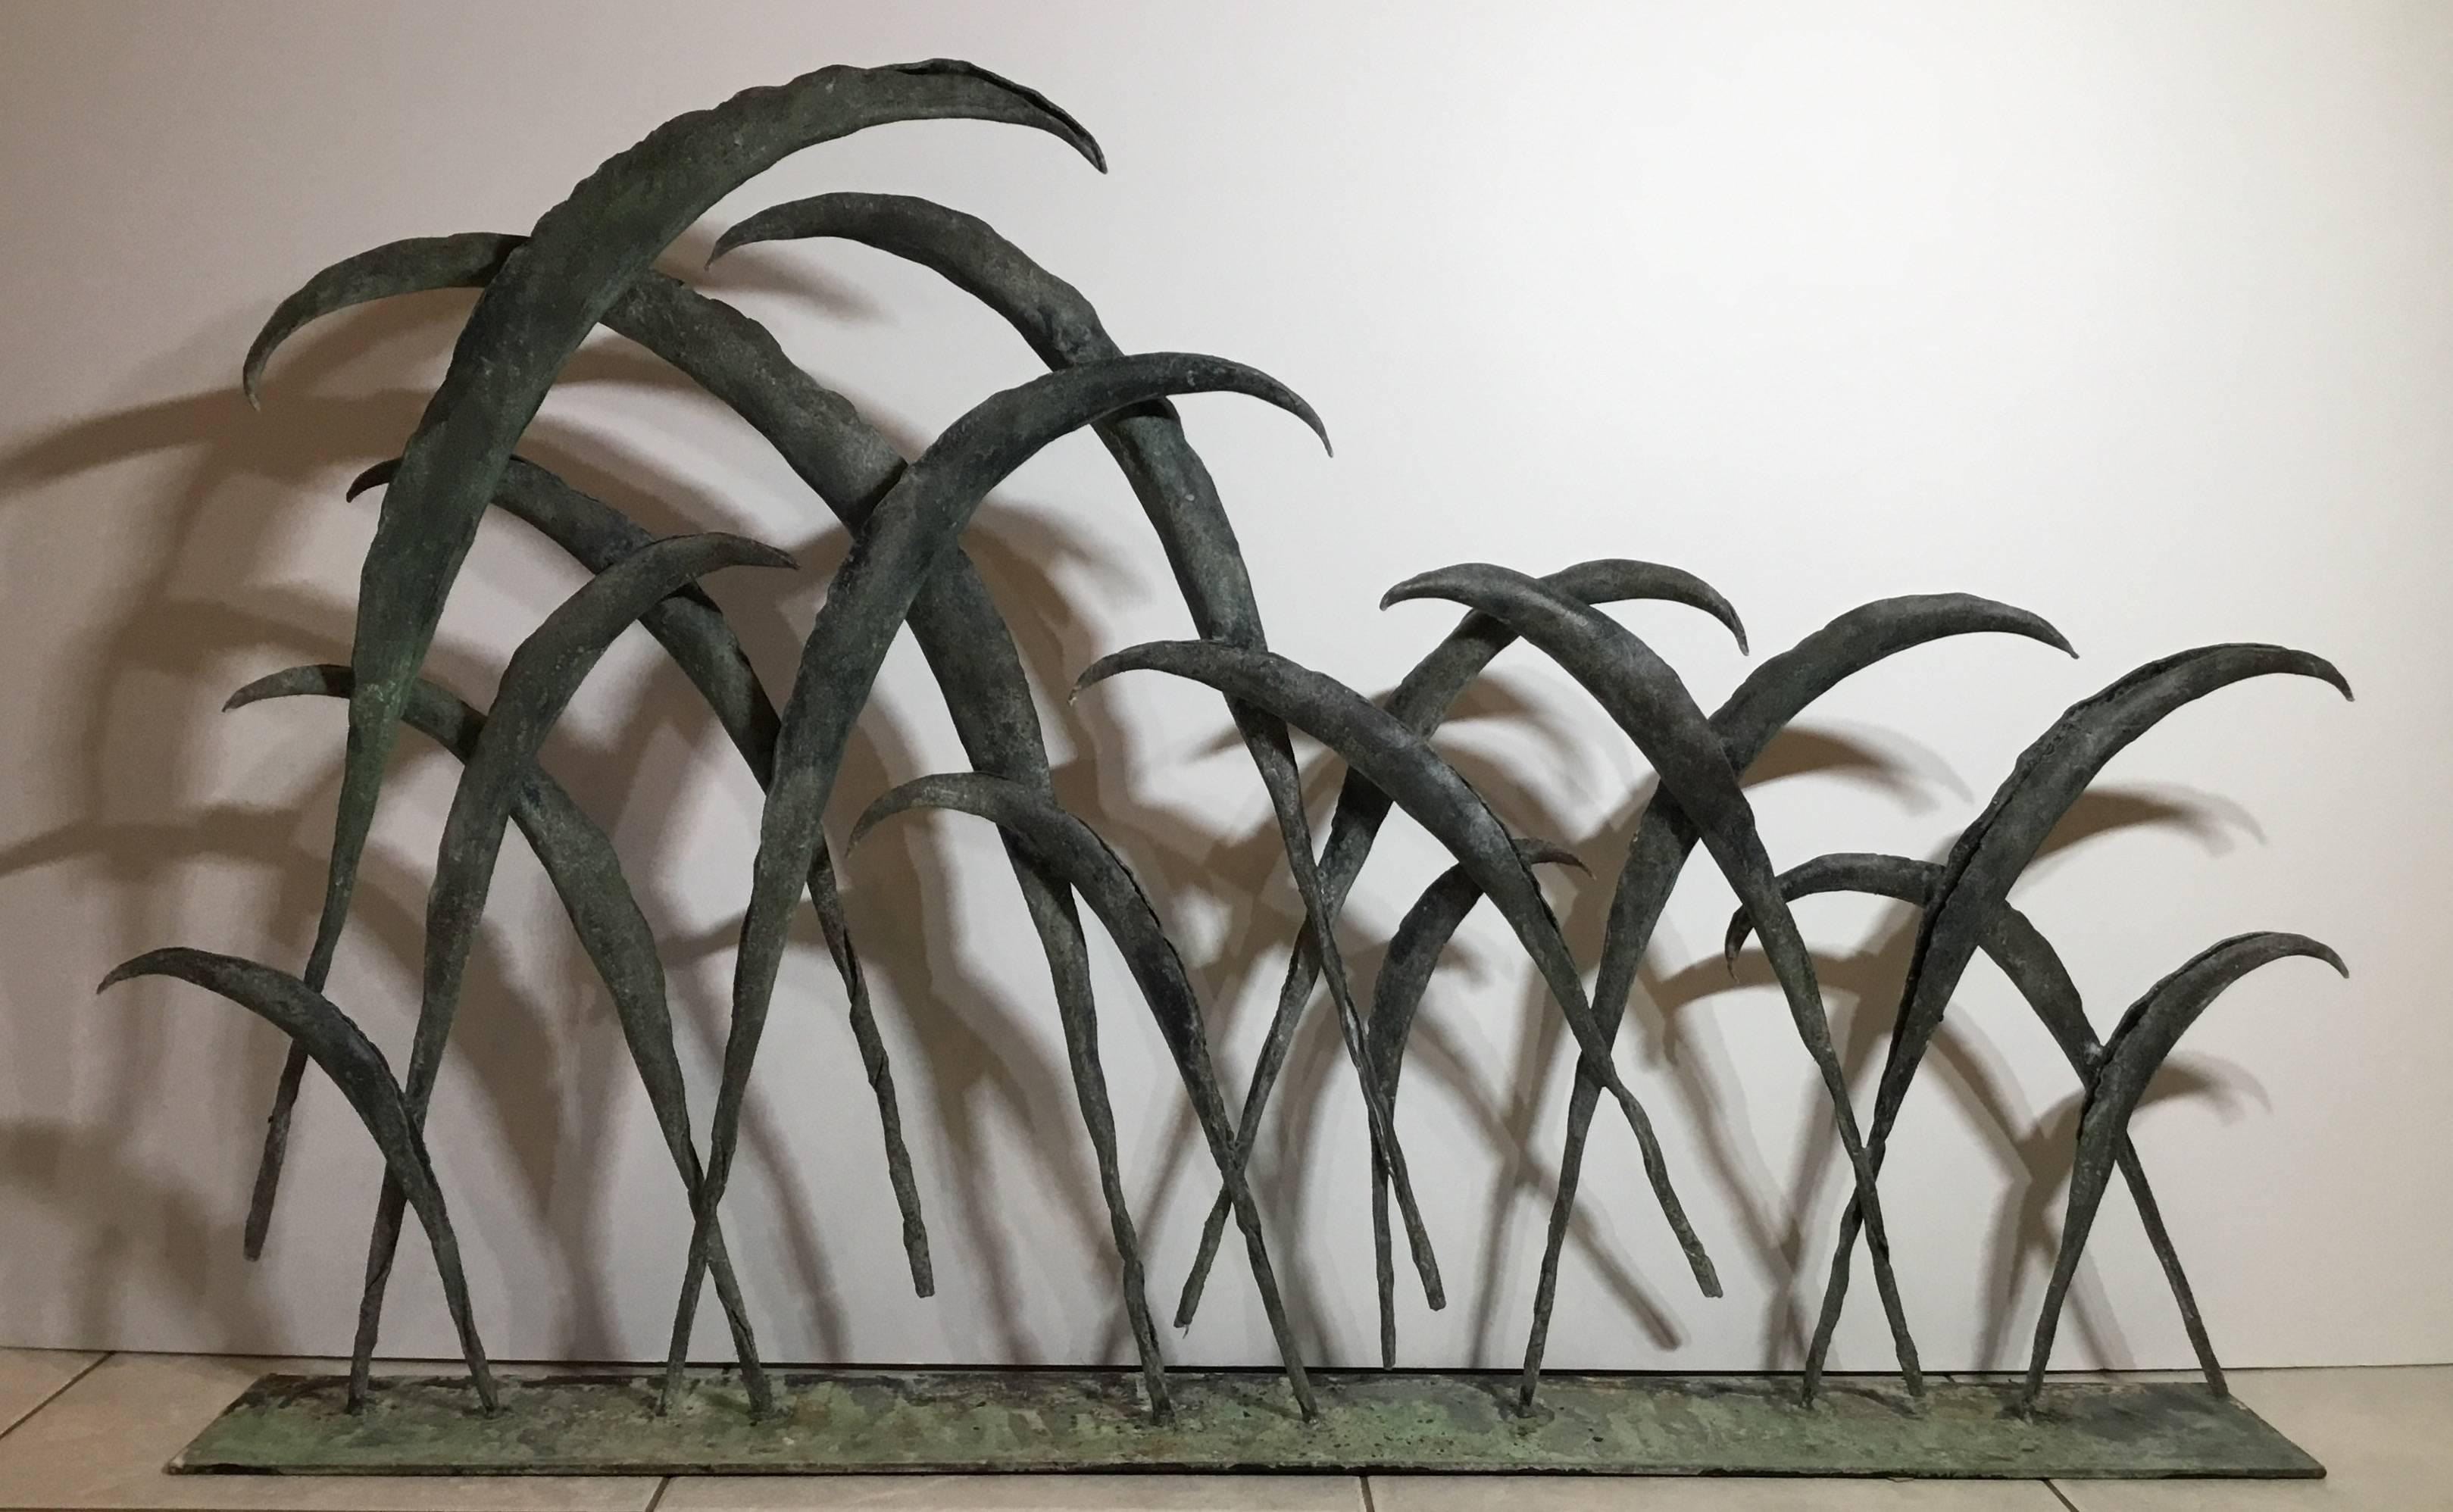 Elegant fireplace screen made of wrought Iron. Florida Everglades plants put together by the artist, probably Floridian.
All professionally mounted on a steel base.
Treated for rust and have a great patina.
Could use in both side as fireplace